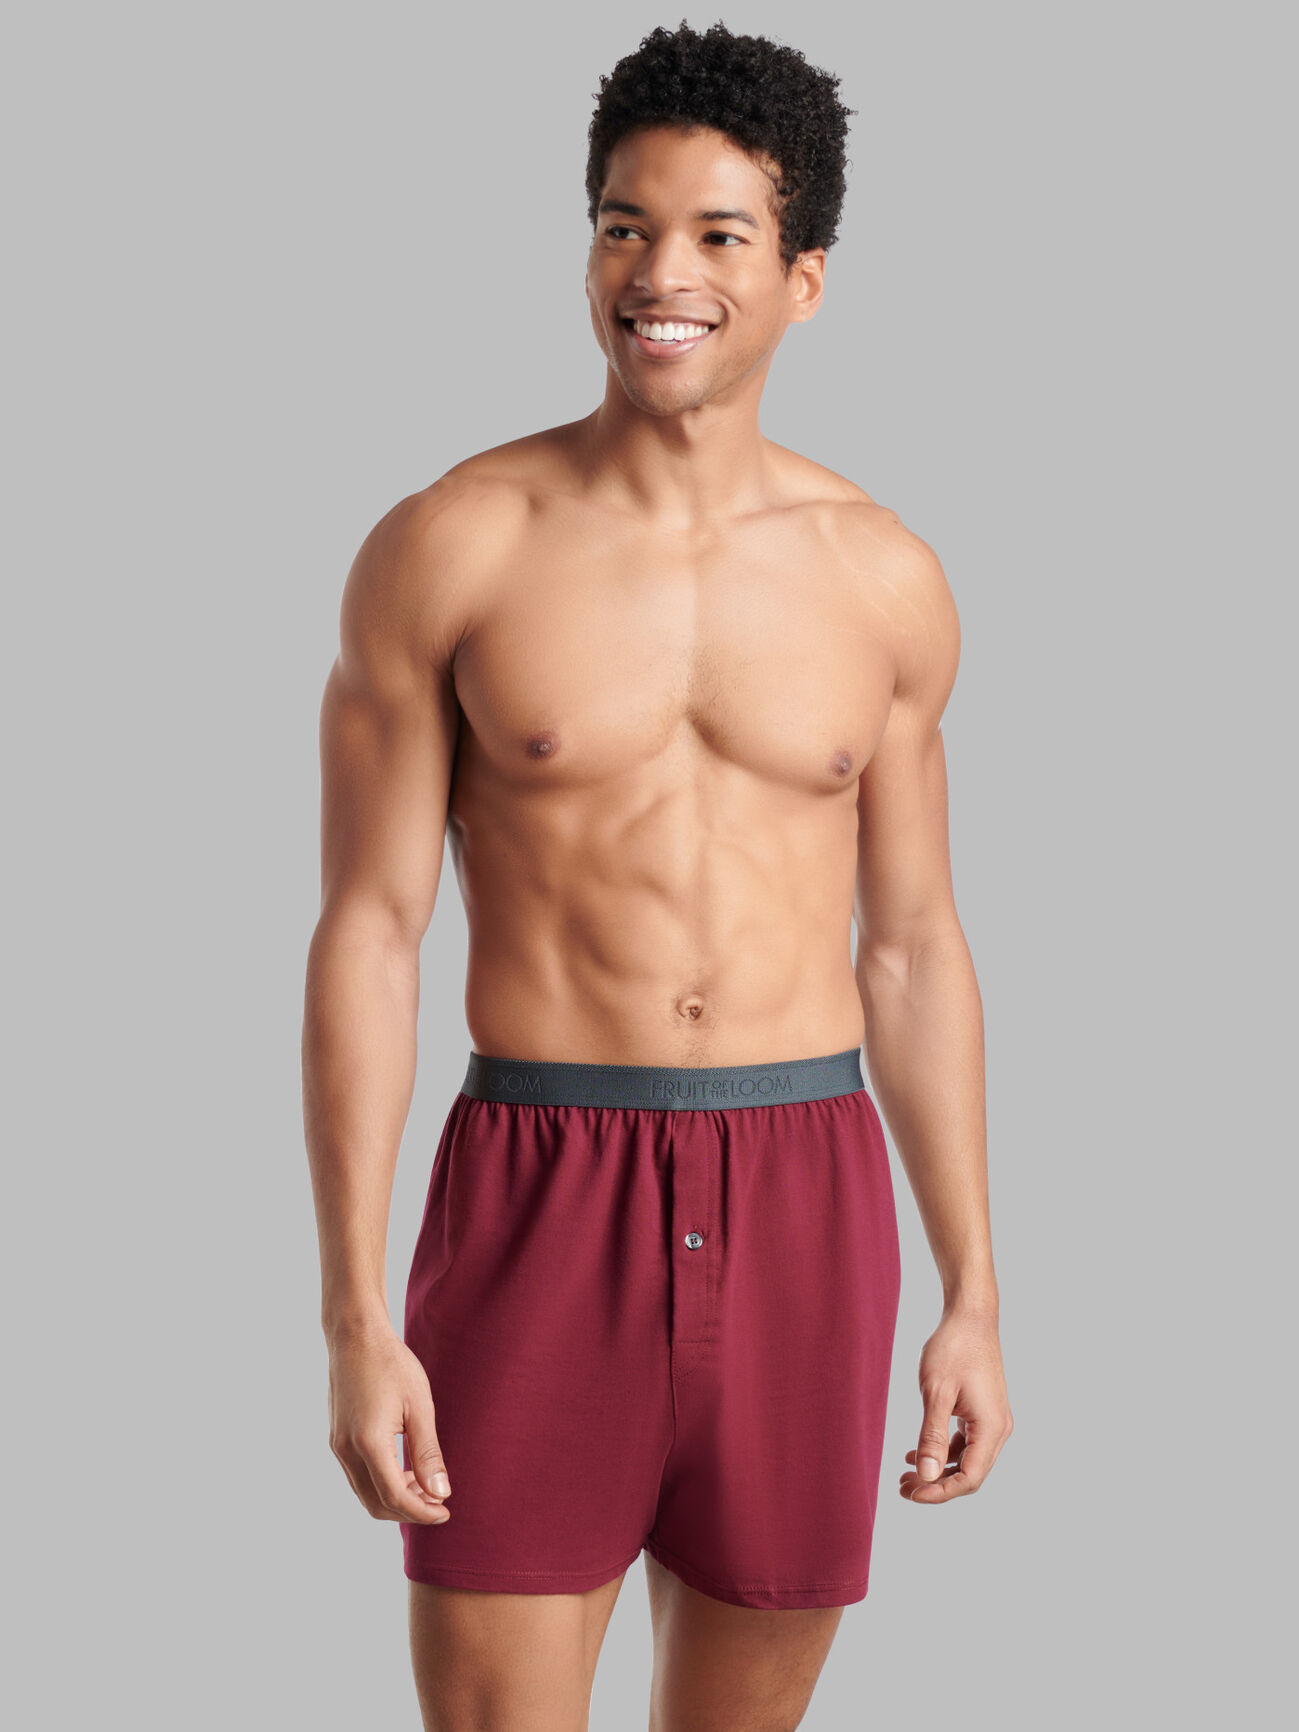 Fruit of the Loom Men's Premium Knit Boxers, Assorted 4 Pack Assorted